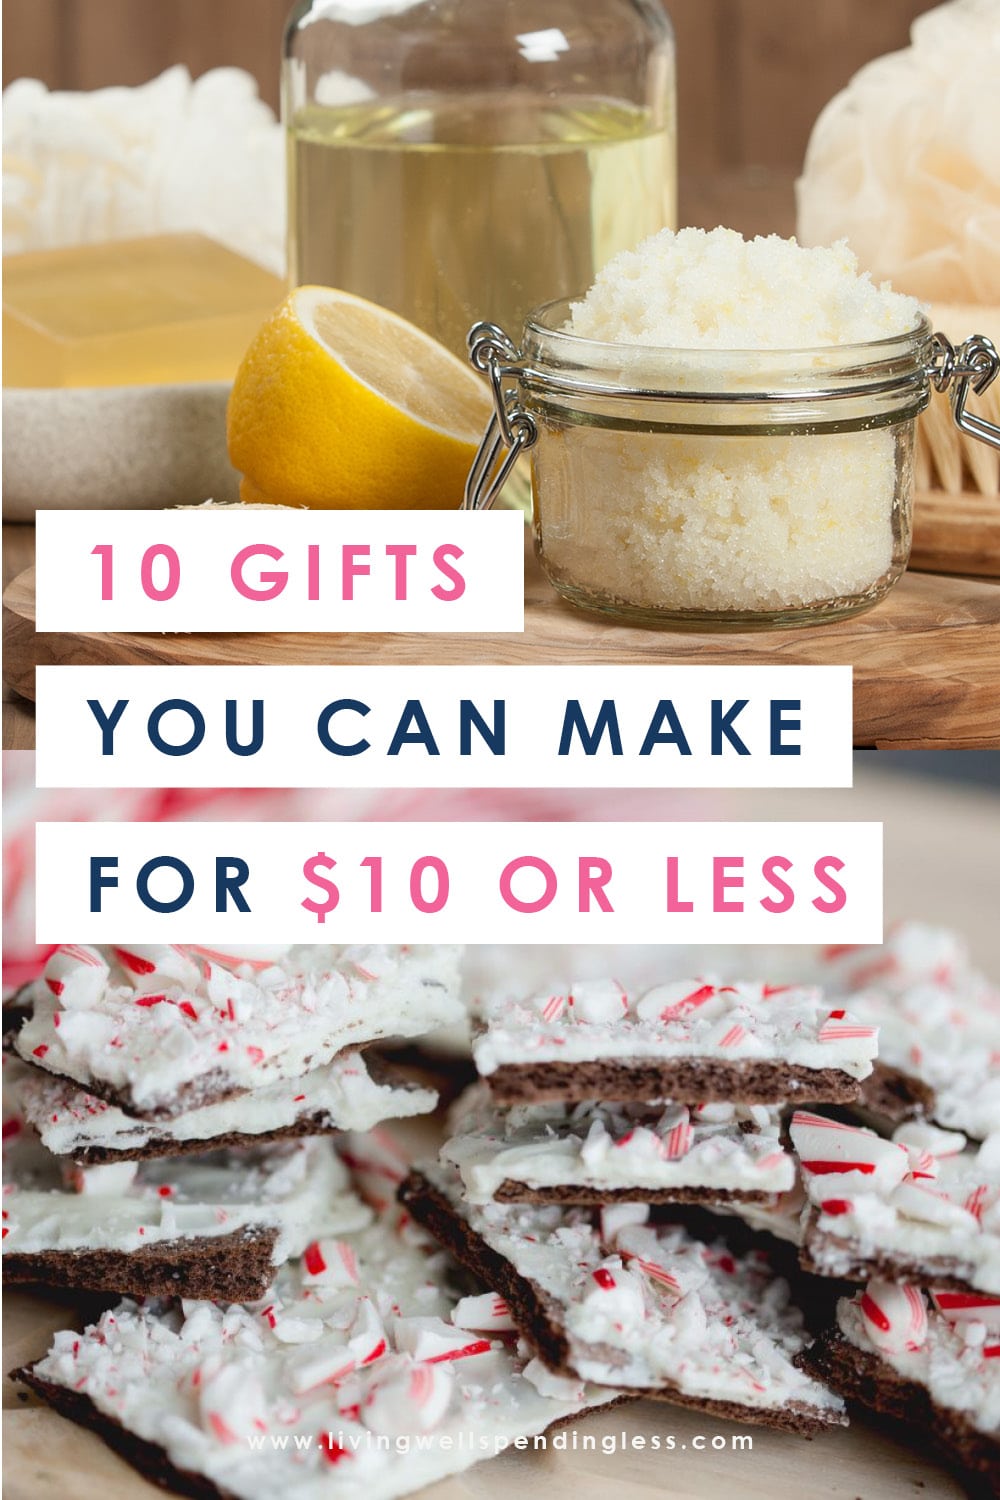 Does your gift list exceed your budget this year? No worries--we have got you covered. Don't miss these 10 super easy (really!) gifts you can make for $10 or less! #diy #homemade #diygifts #holidays #thrifty #handmade #frugalgifts #budgetfriendlygifts #handmadegifts #cheapgifts